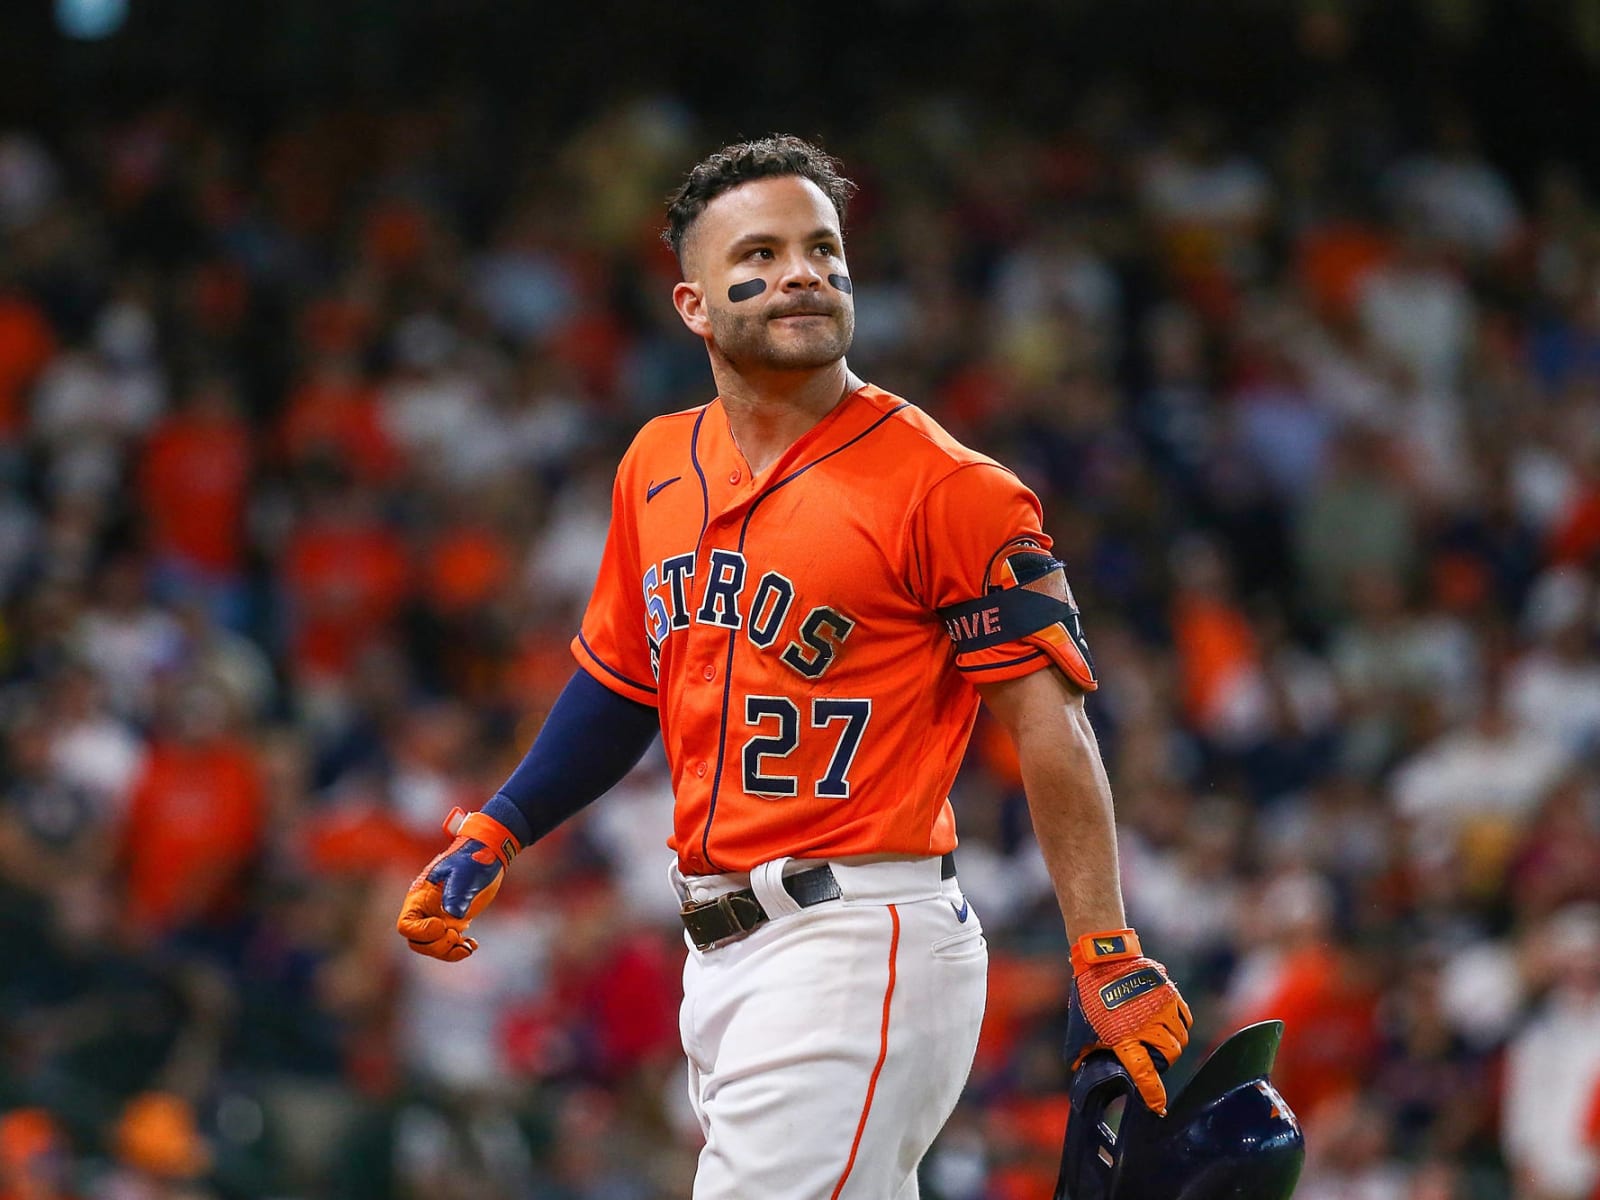 Red Sox fans use profane Jose Altuve chant during Game 3